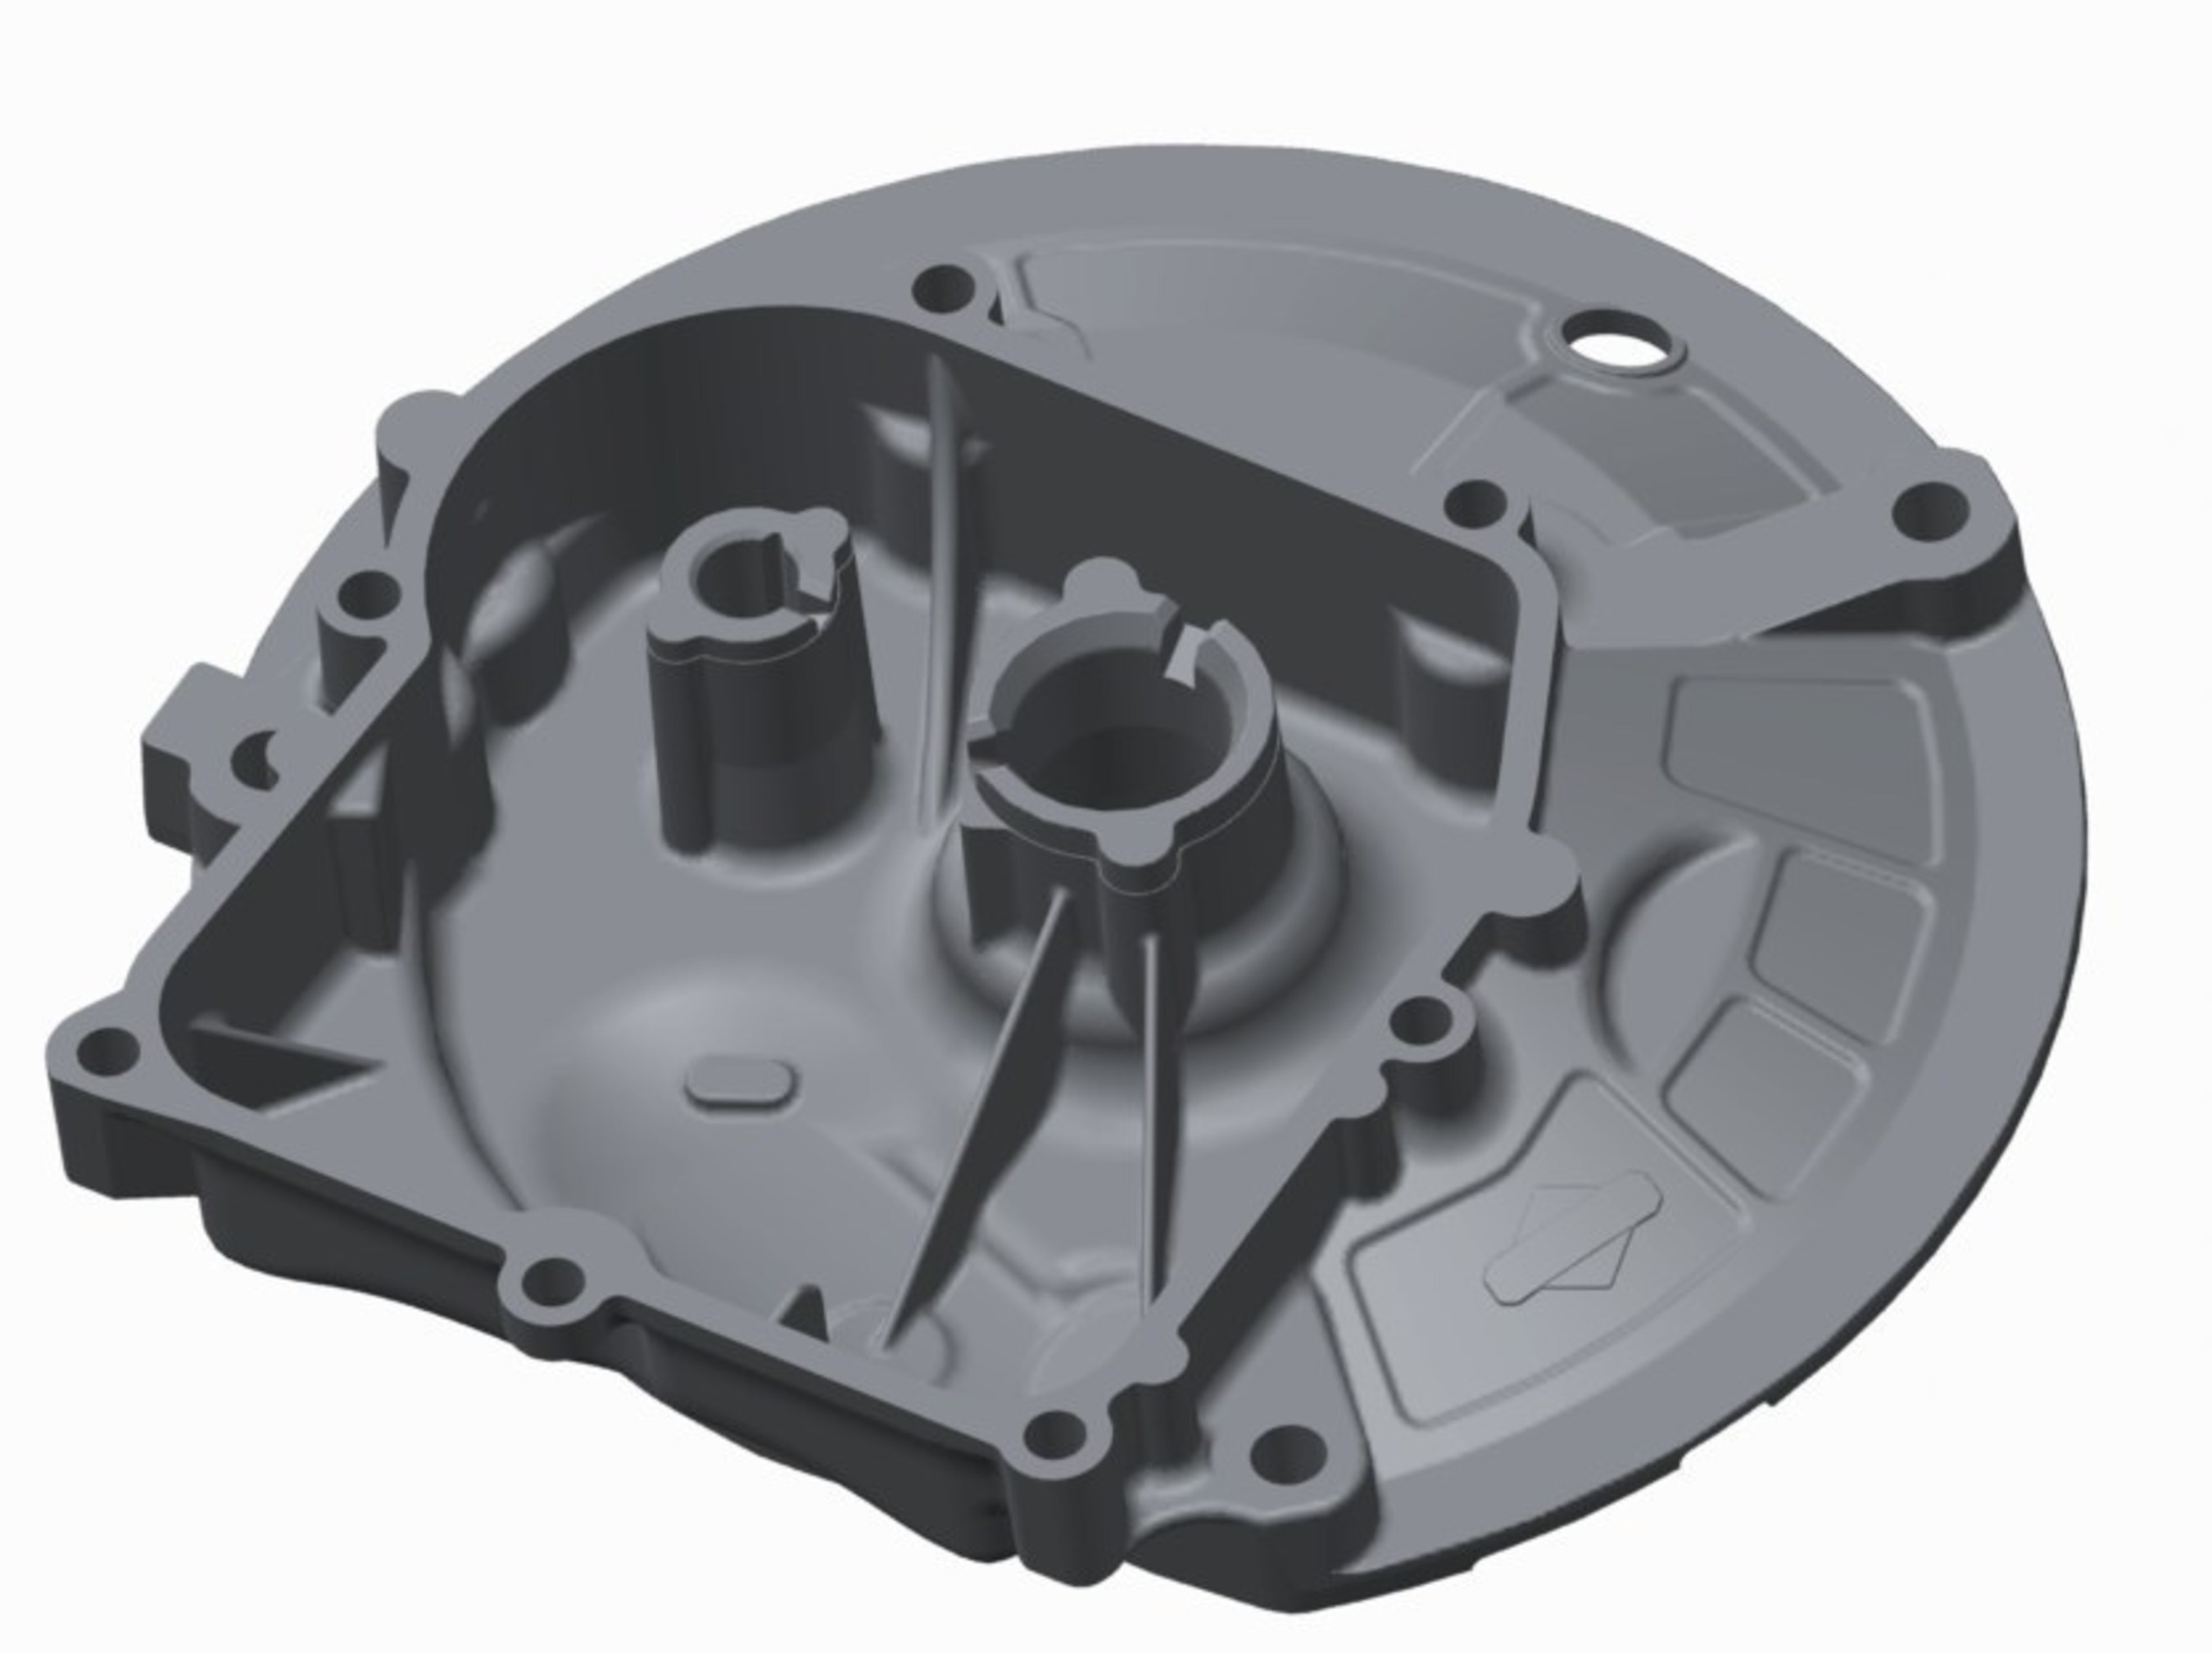 Briggs & Stratton Corporation Recognized For Innovation By North American Die Casting Association